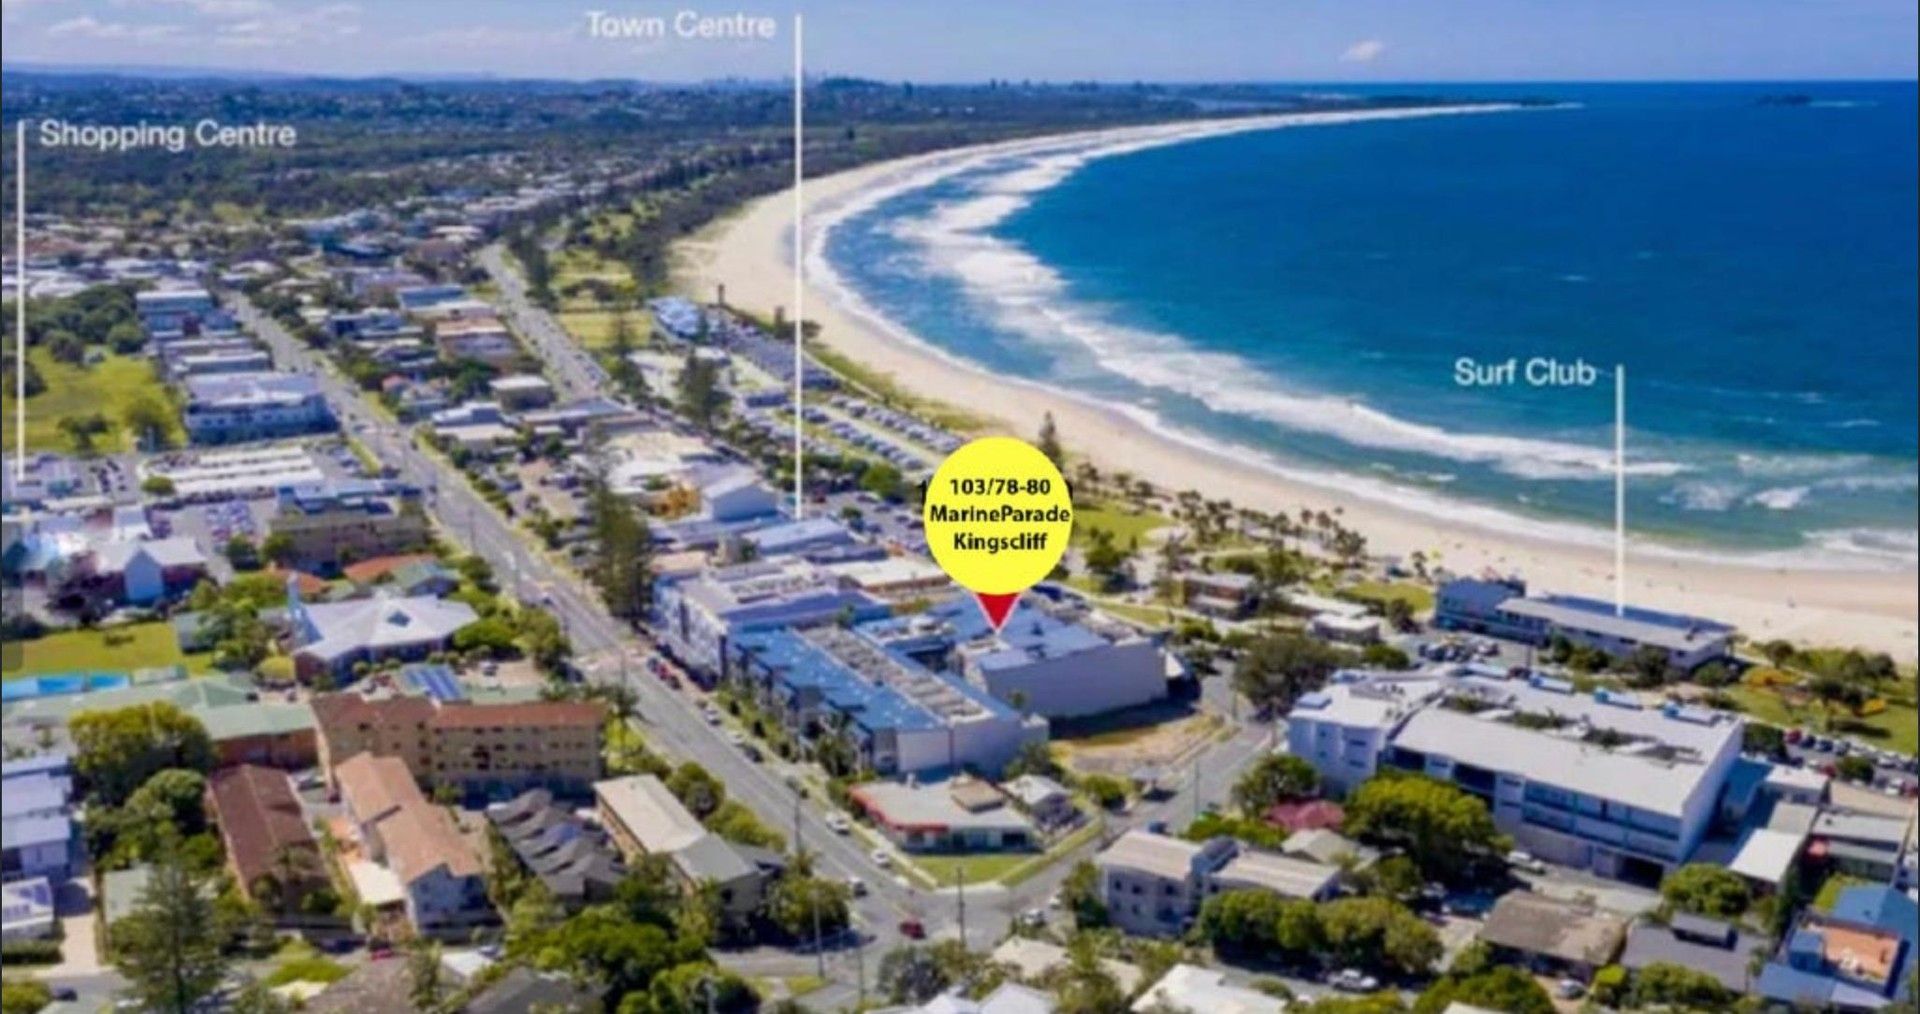 3 bedrooms Apartment / Unit / Flat in 103/78-80 Marine Parade KINGSCLIFF NSW, 2487